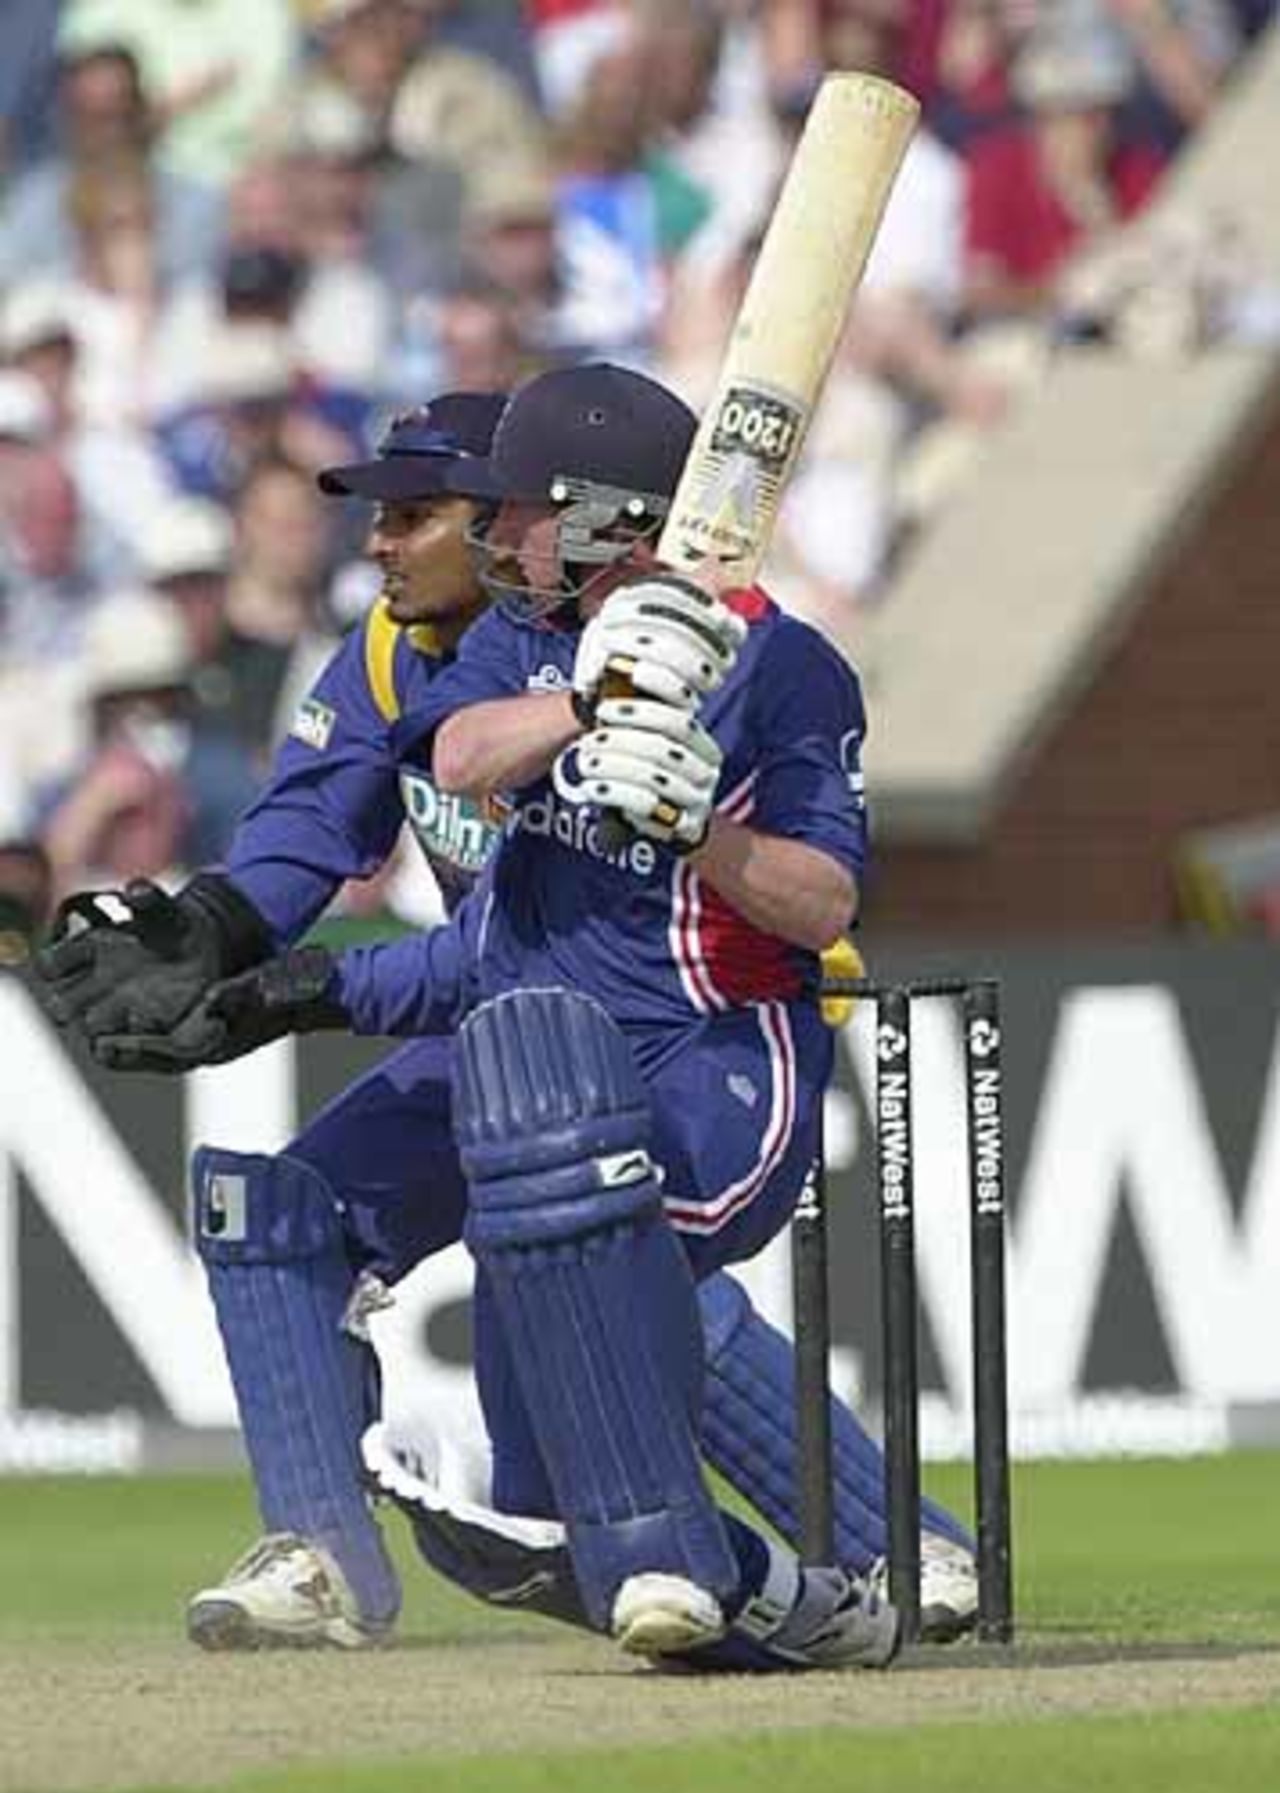 Paul Collingwood with a cut shot in his innings of 29, England v Sri Lanka at Manchester, July 2002